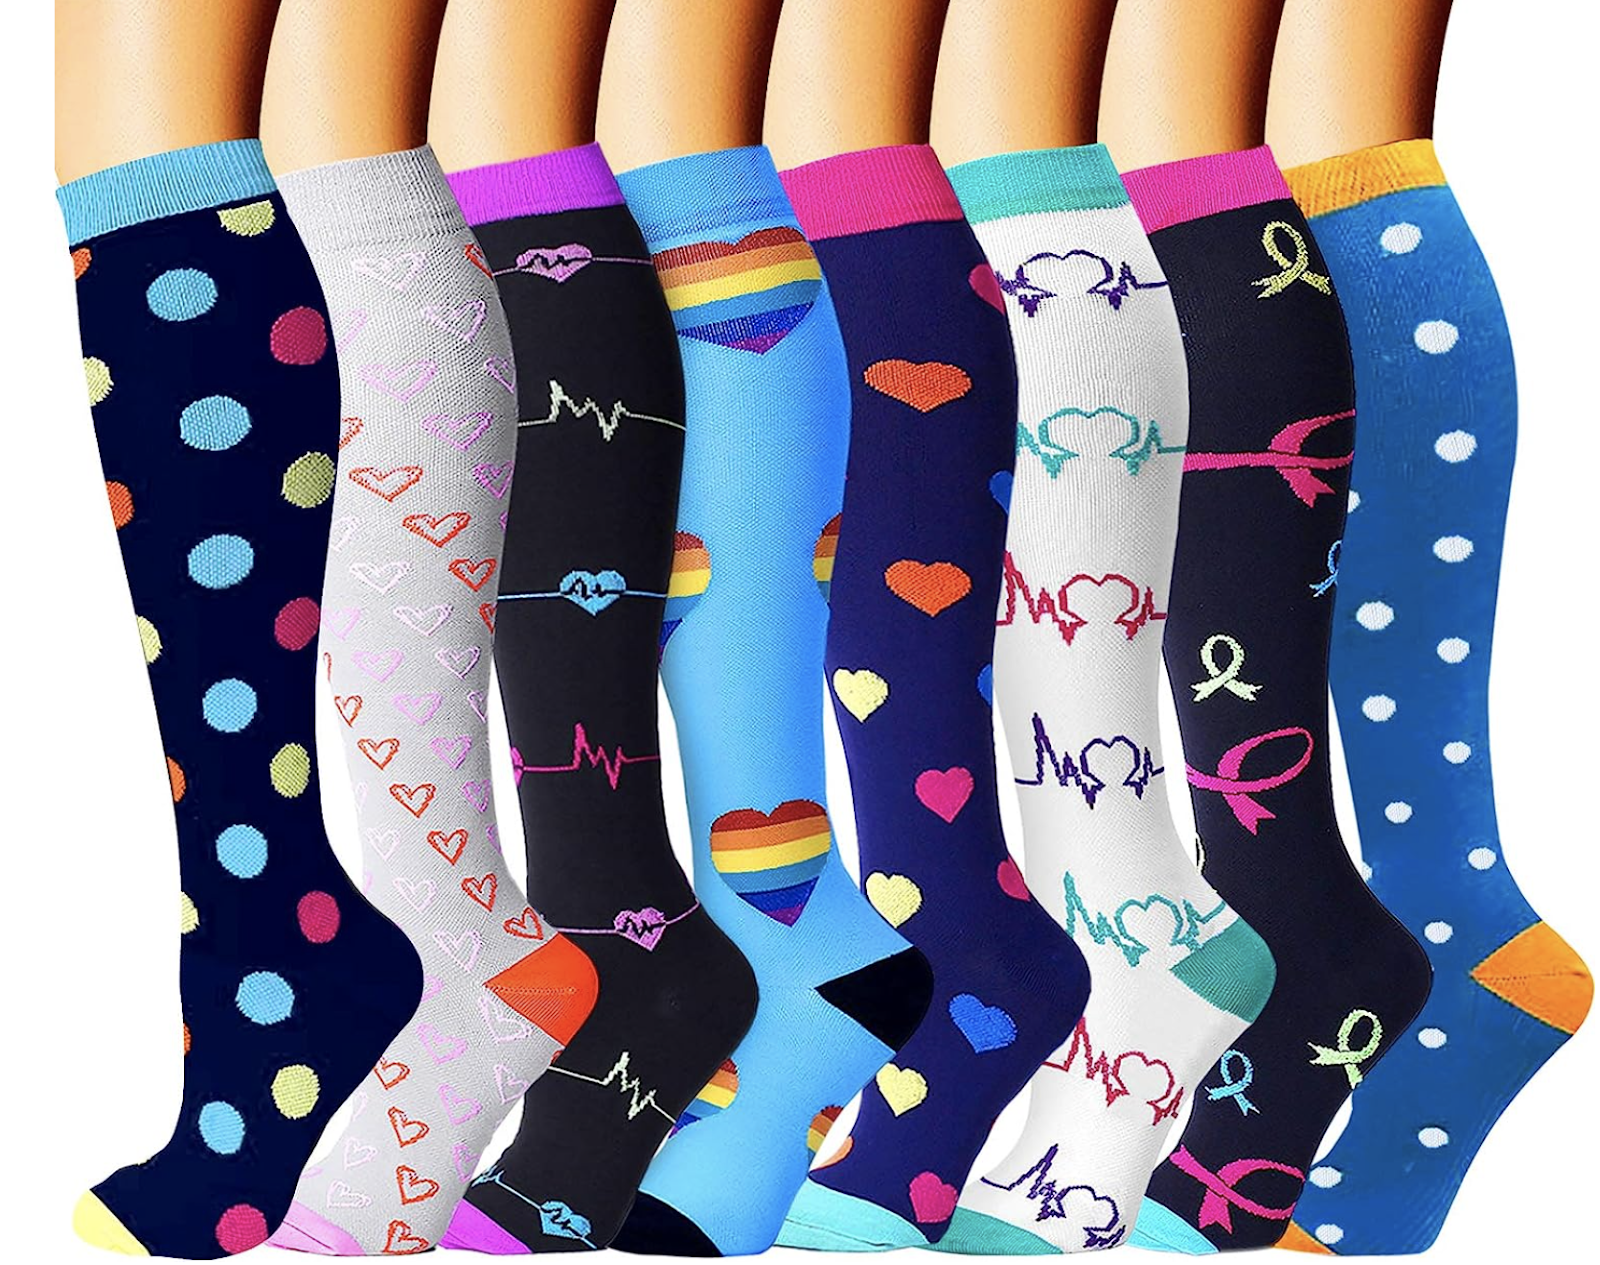 knee high socks in various bright, colorful patterns